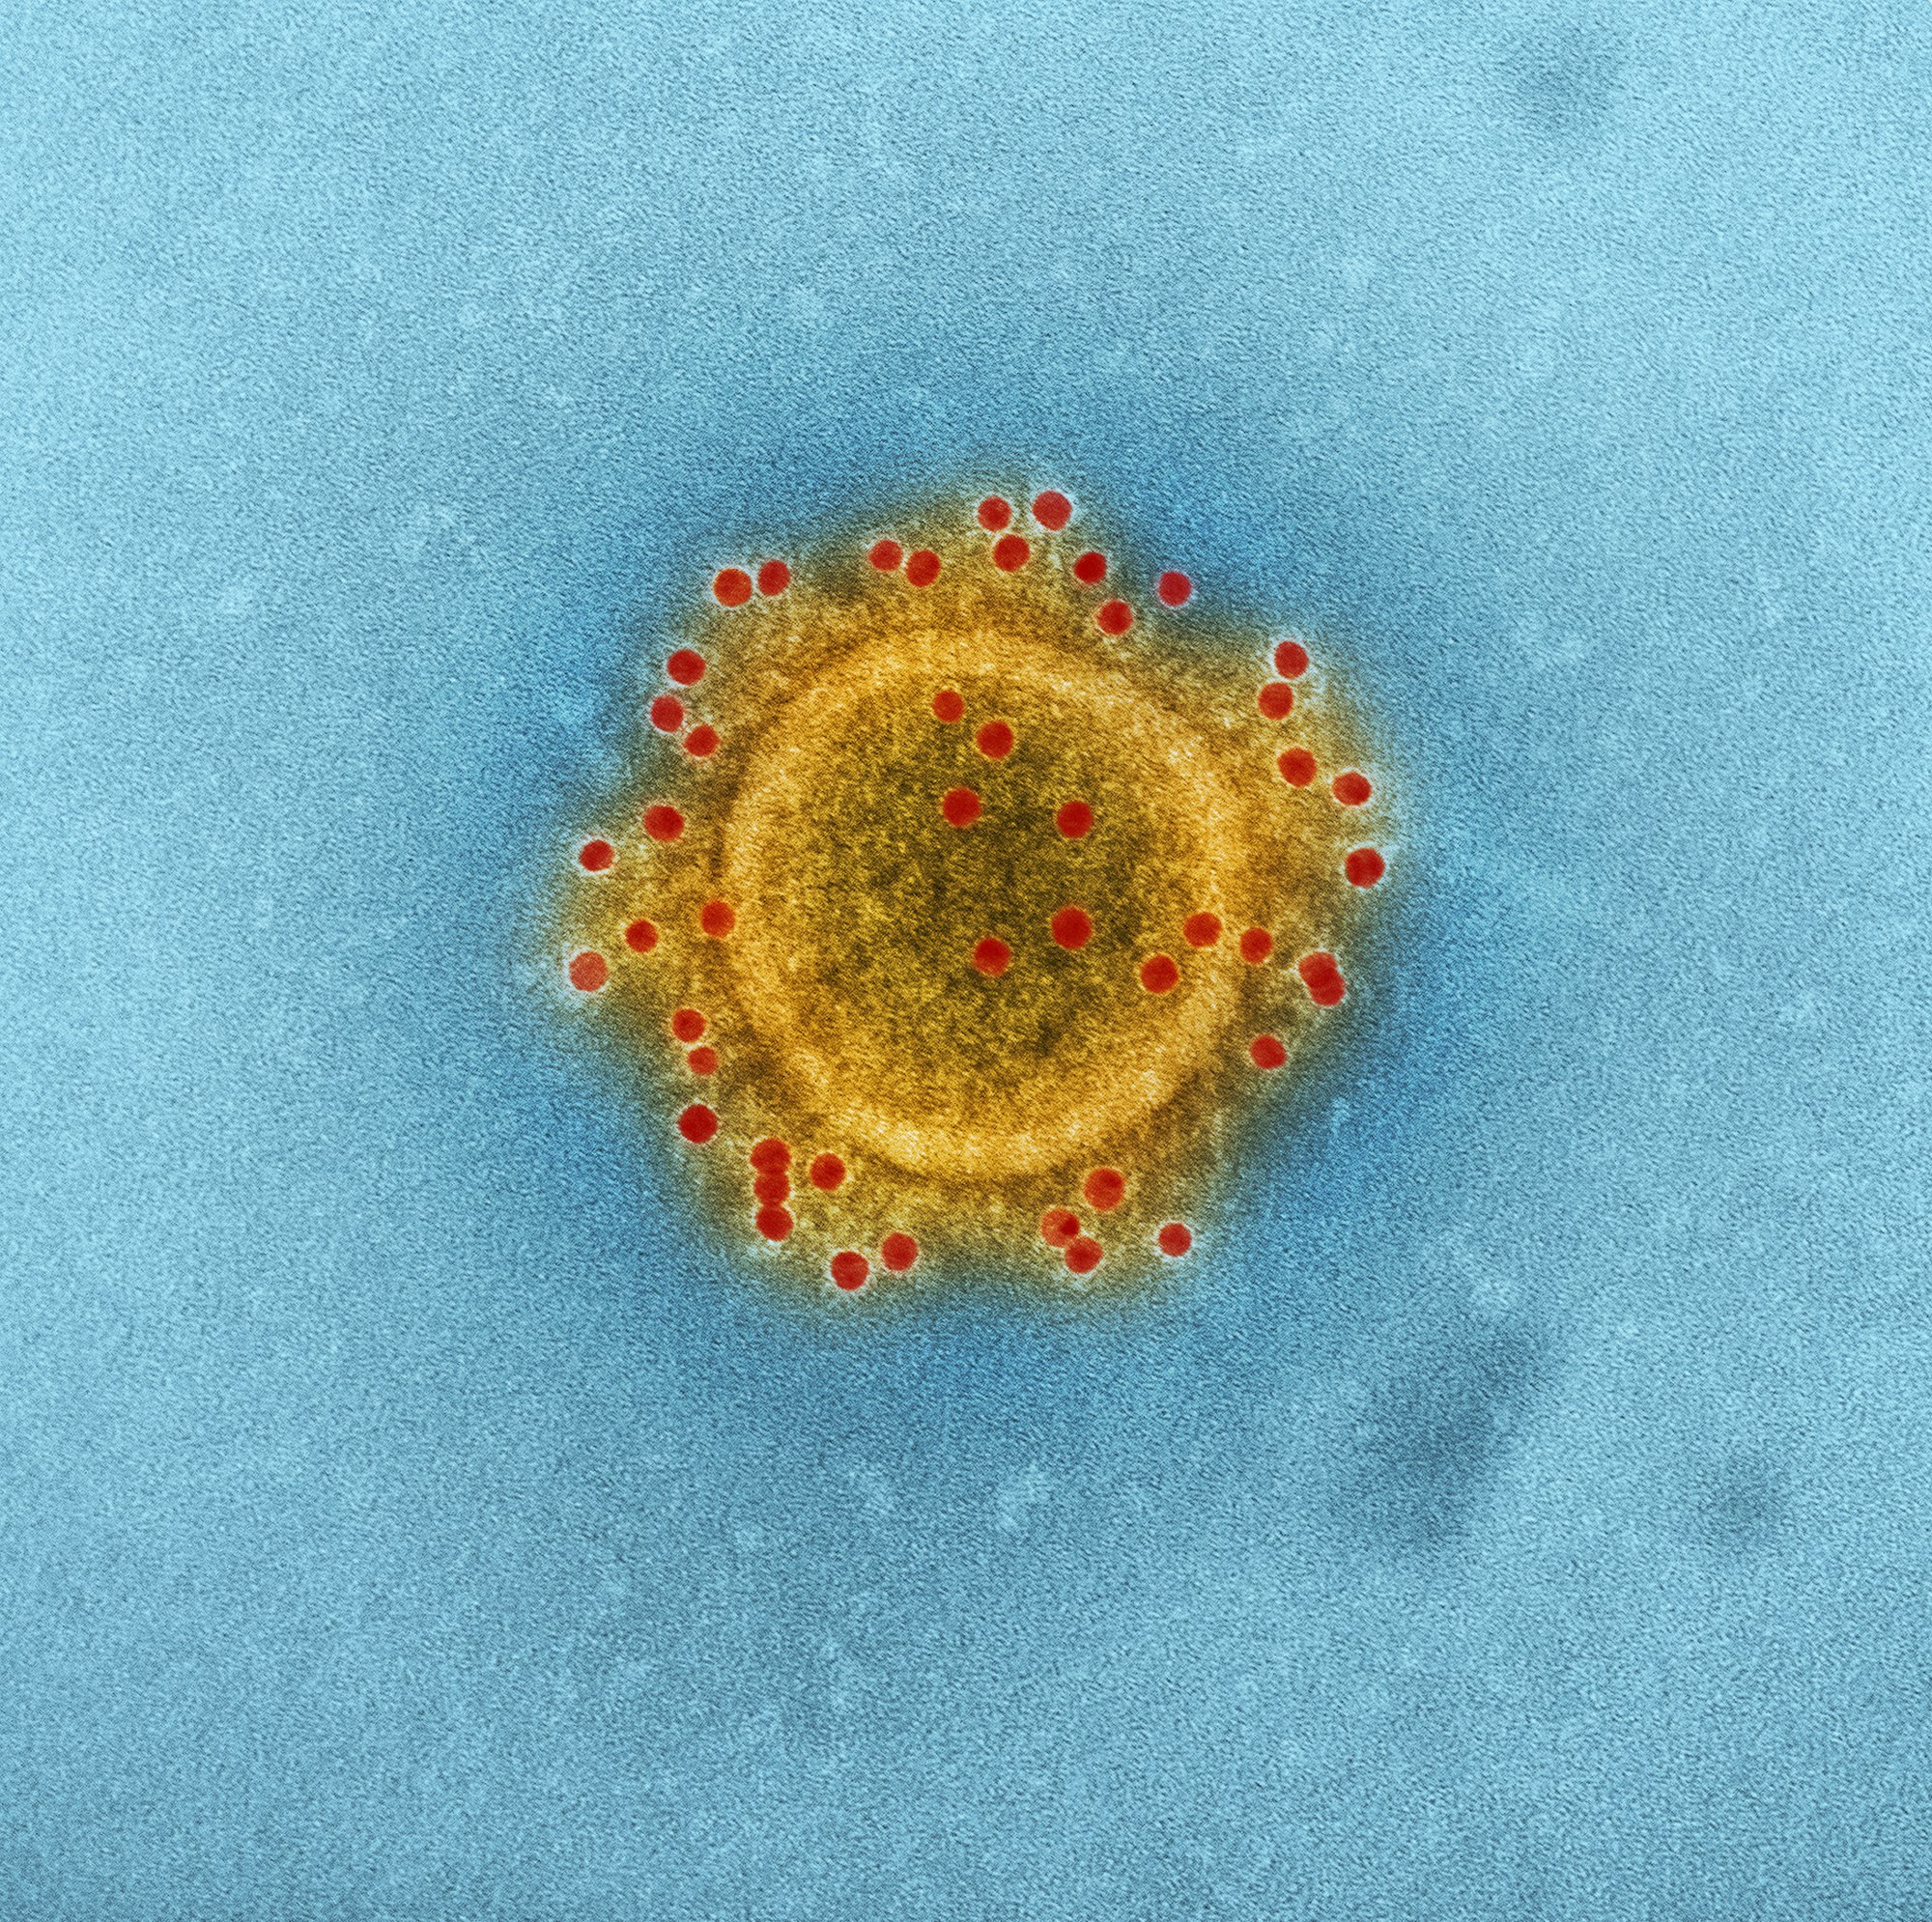 Produced by the National Institute of Allergy and Infectious Diseases (NIAID), this highly magnified, digitally colorized transmission electron microscopic (TEM) image highlights the particle envelope of a single, spherical shaped, Middle East respiratory syndrome coronavirus (MERS-CoV) virion, through the process of immunolabeling, the envelope proteins, using rabbit HCoV-EMC/2012 primary antibody, and goat anti-rabbit 10nm gold particles.